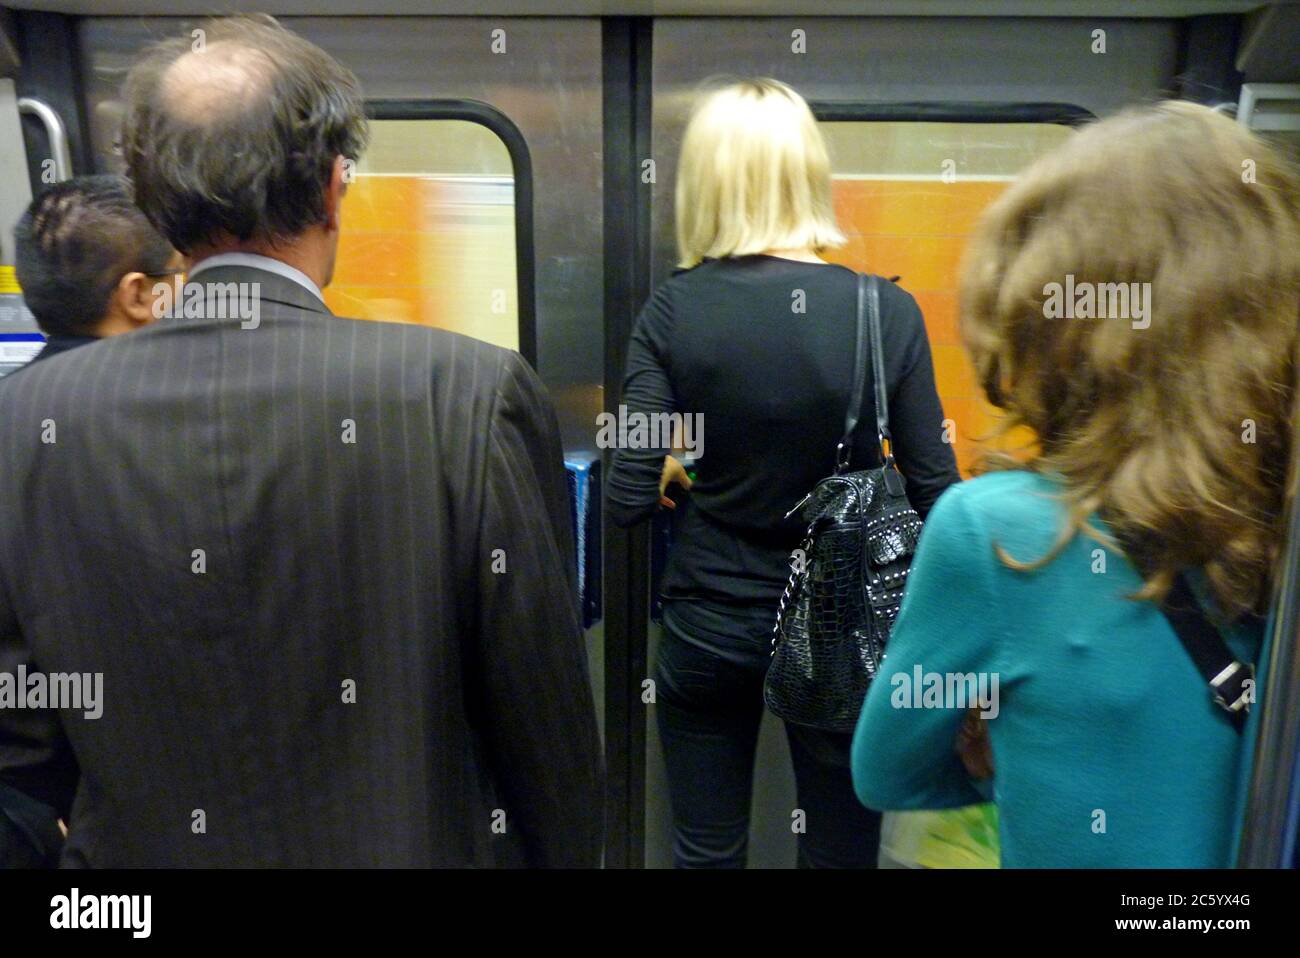 People waiting to exit at their station. Stock Photo